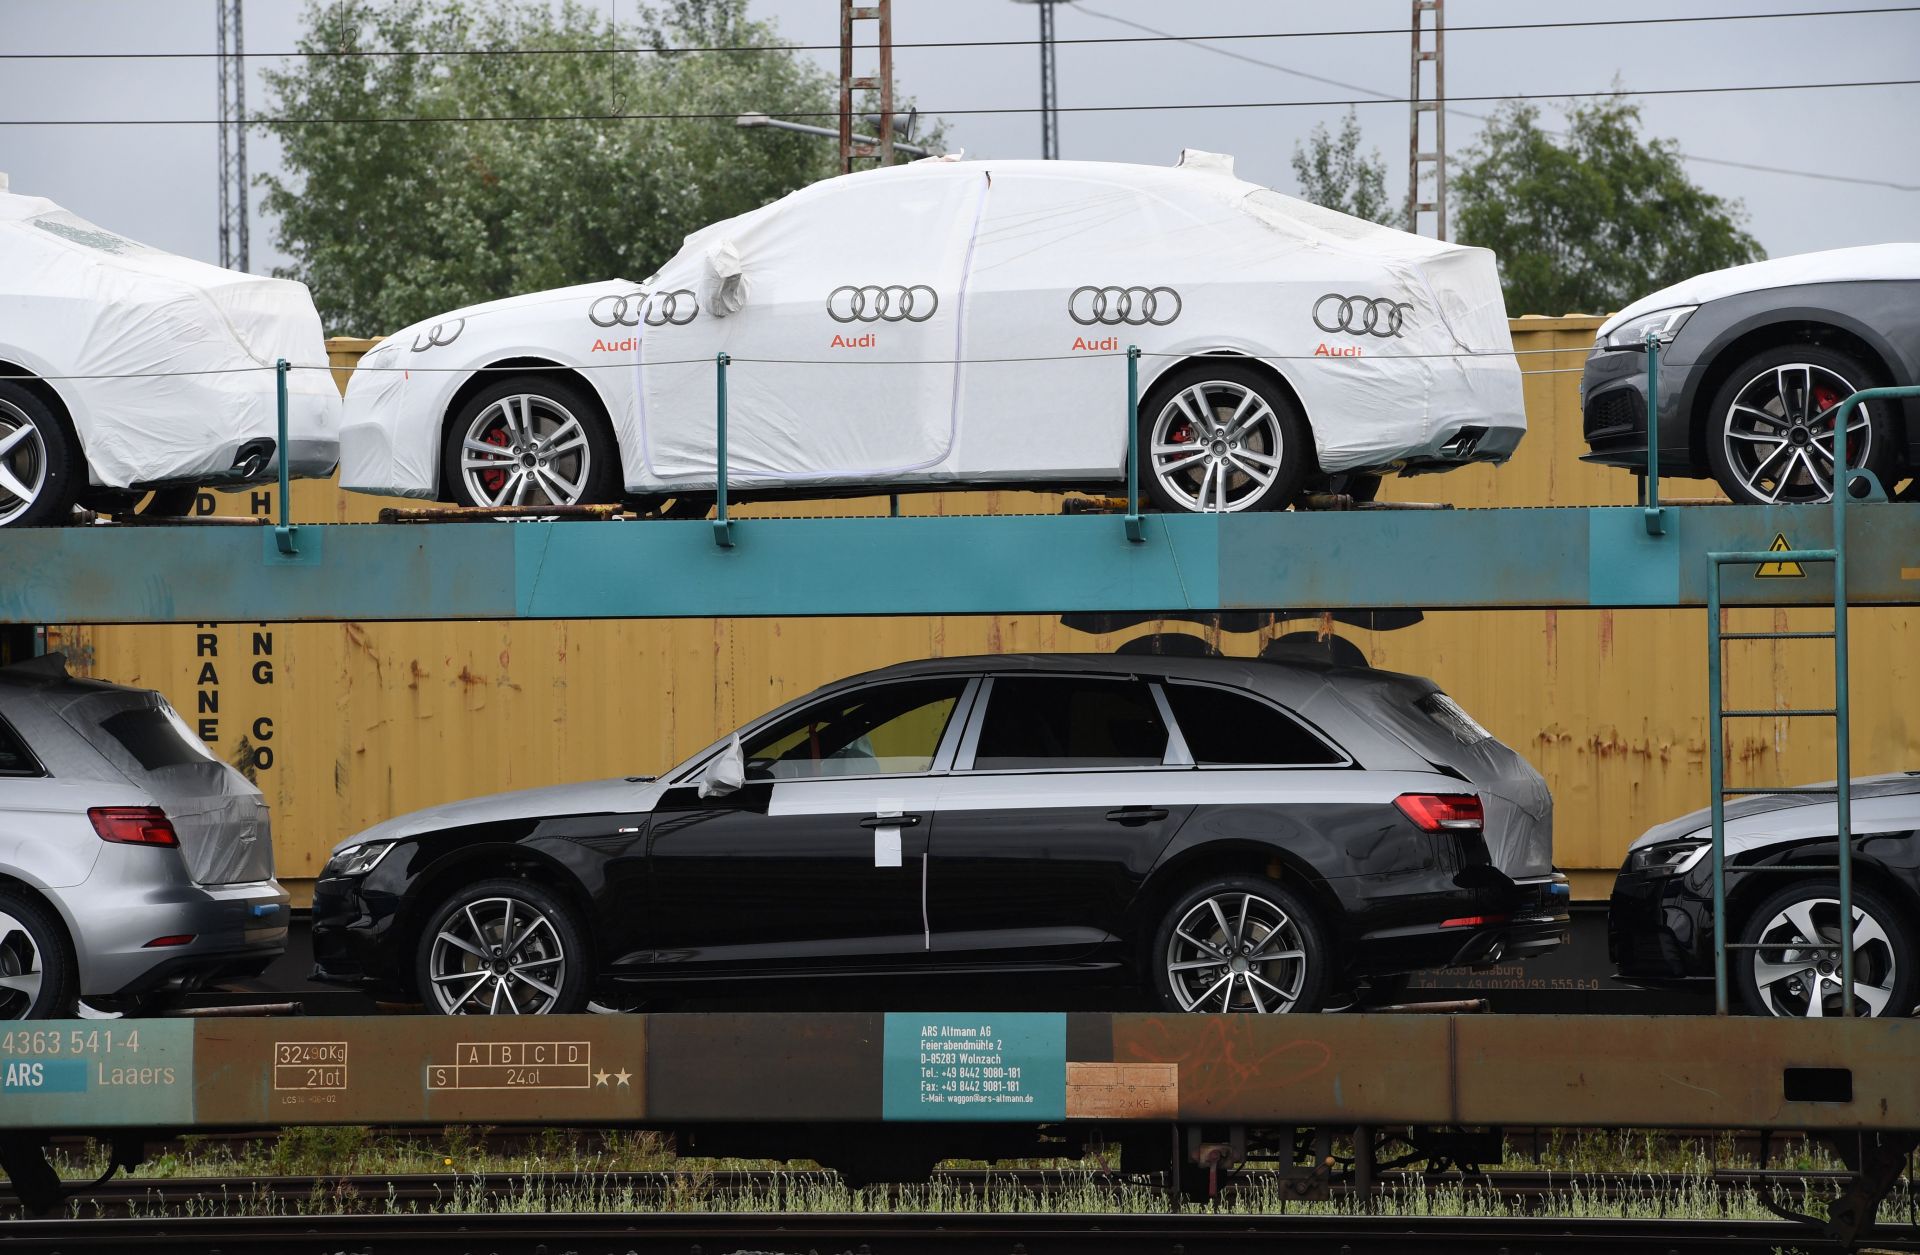 Cars from German manufacturer Audi await transport in the German port city of Bremerhaven in July 2017.